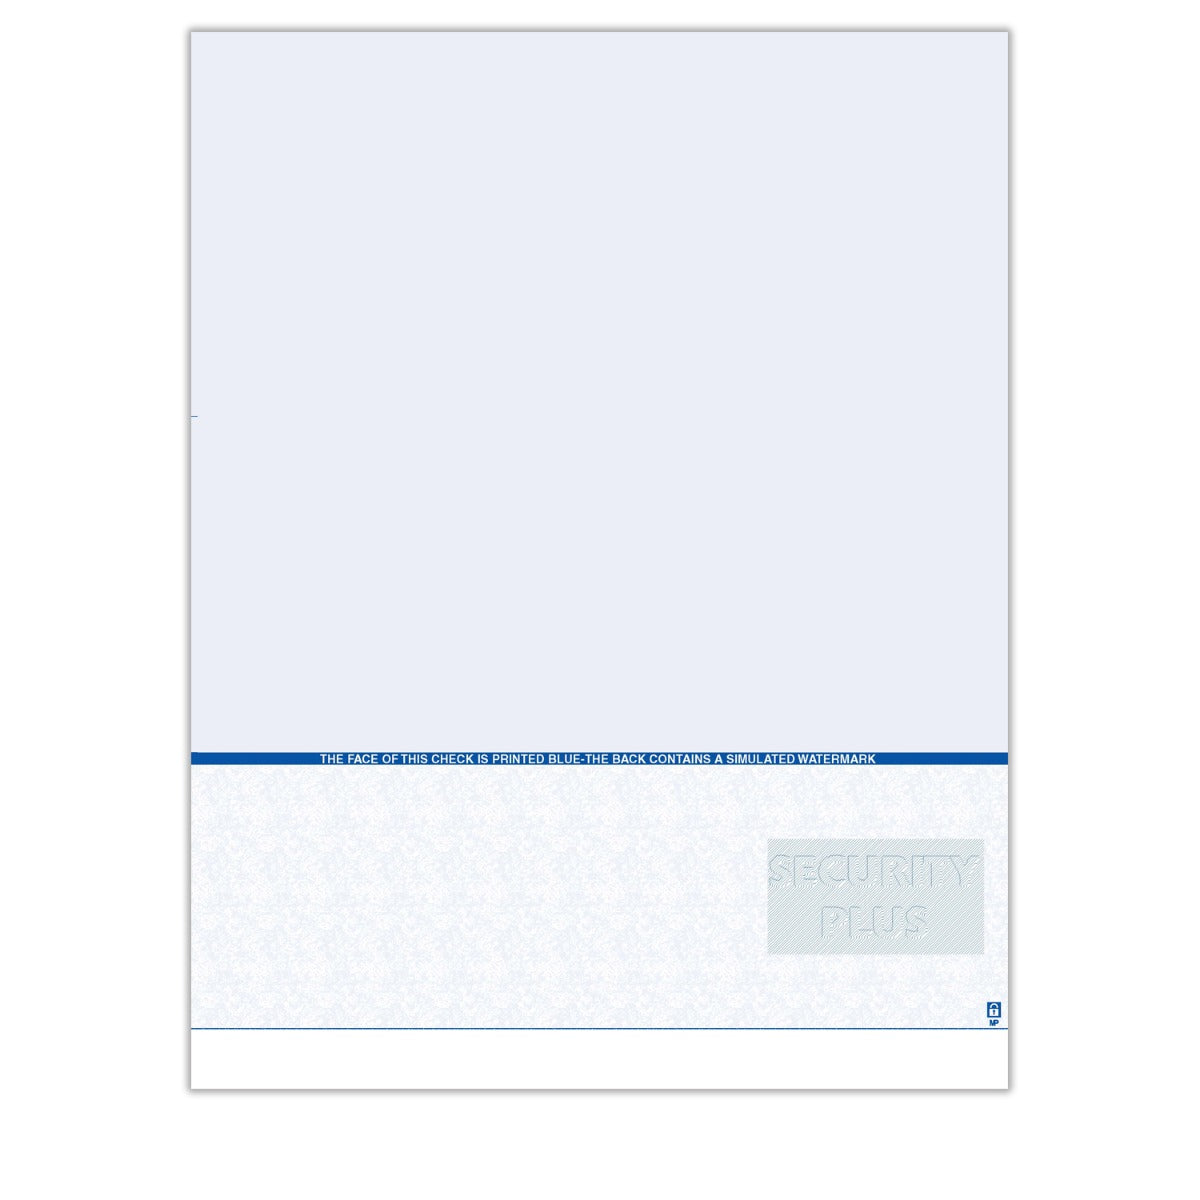 TROY Security Plus Check Paper, Blue, Check Bottom, Ream